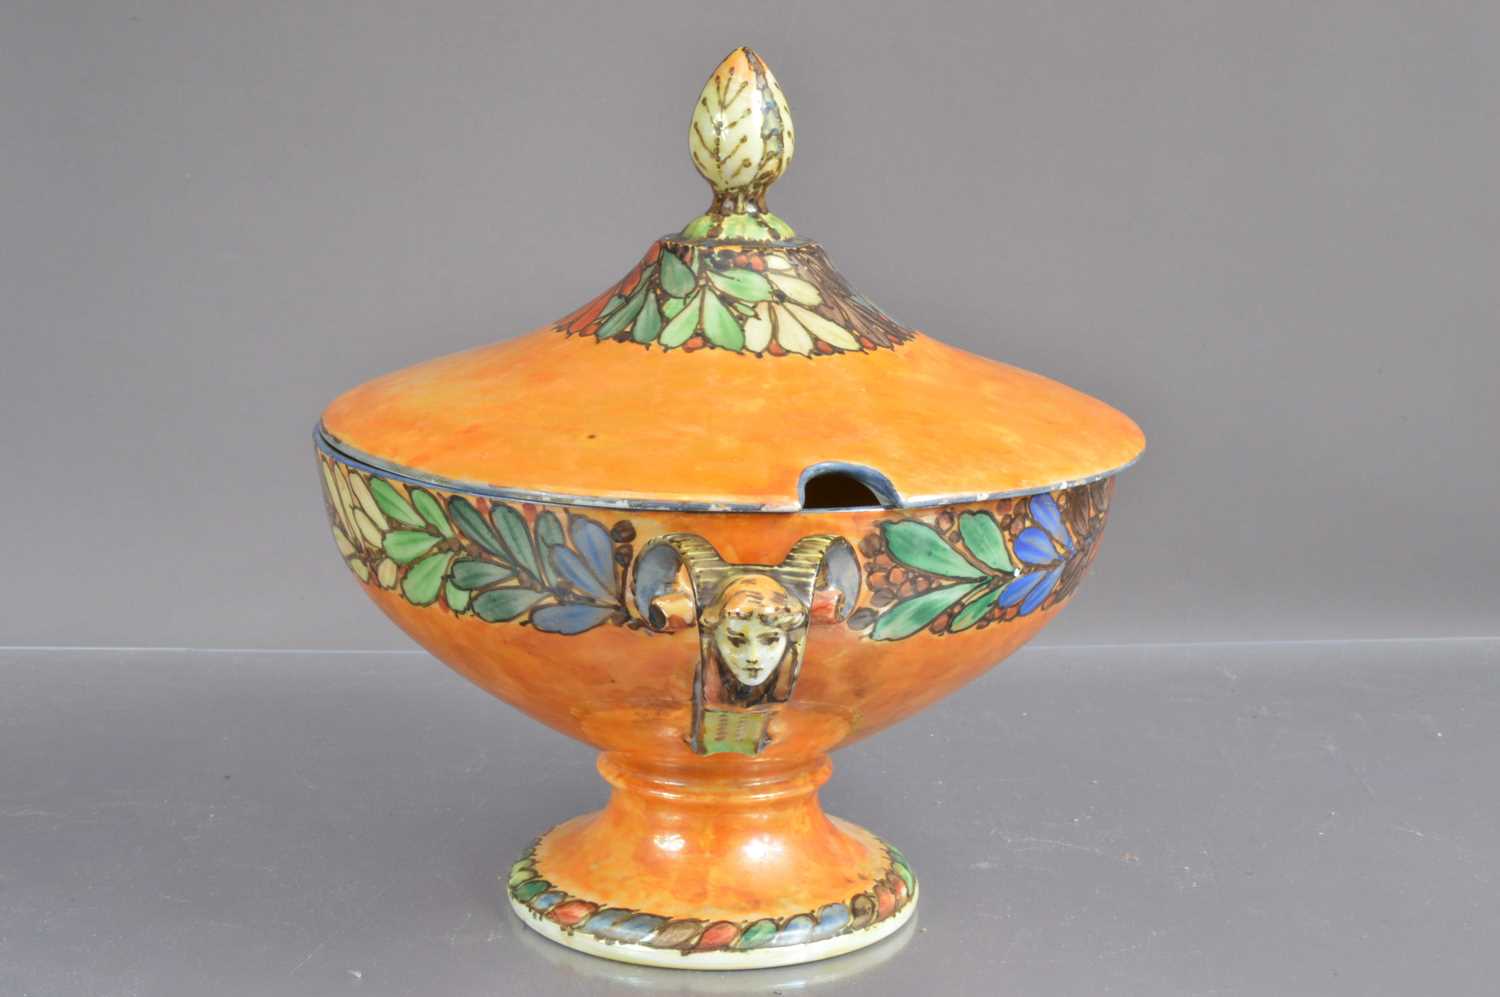 A large Art Deco style lustre-glaze tureen bowl and cover